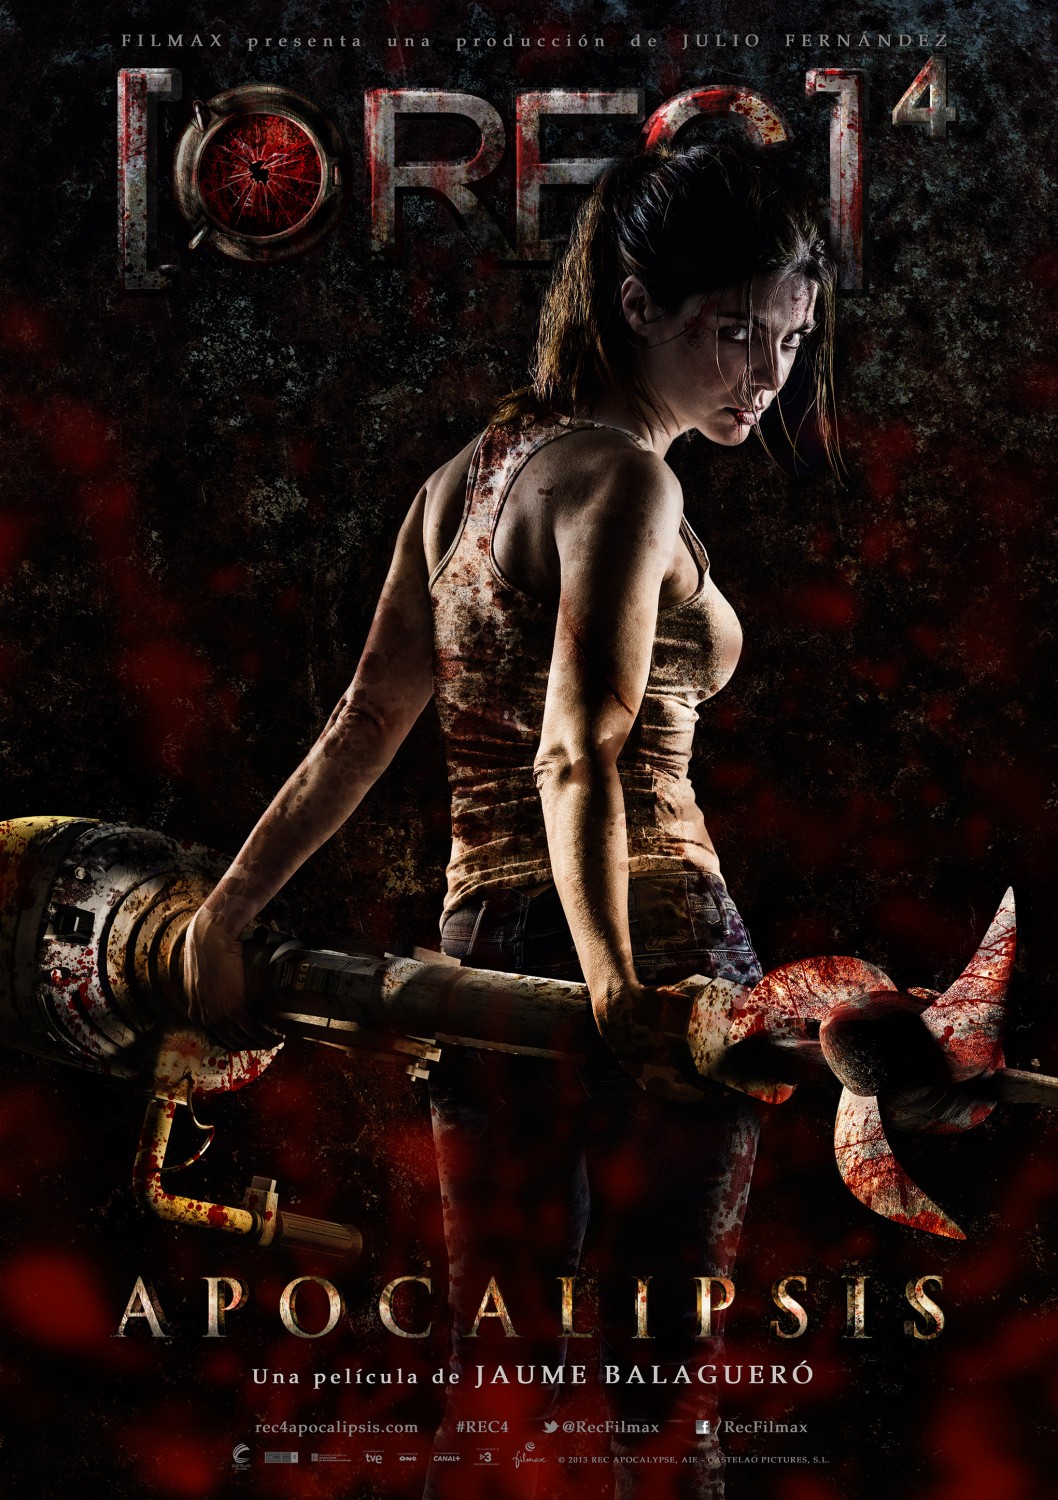 Extra Large Movie Poster Image for [REC] 4: Apocalipsis